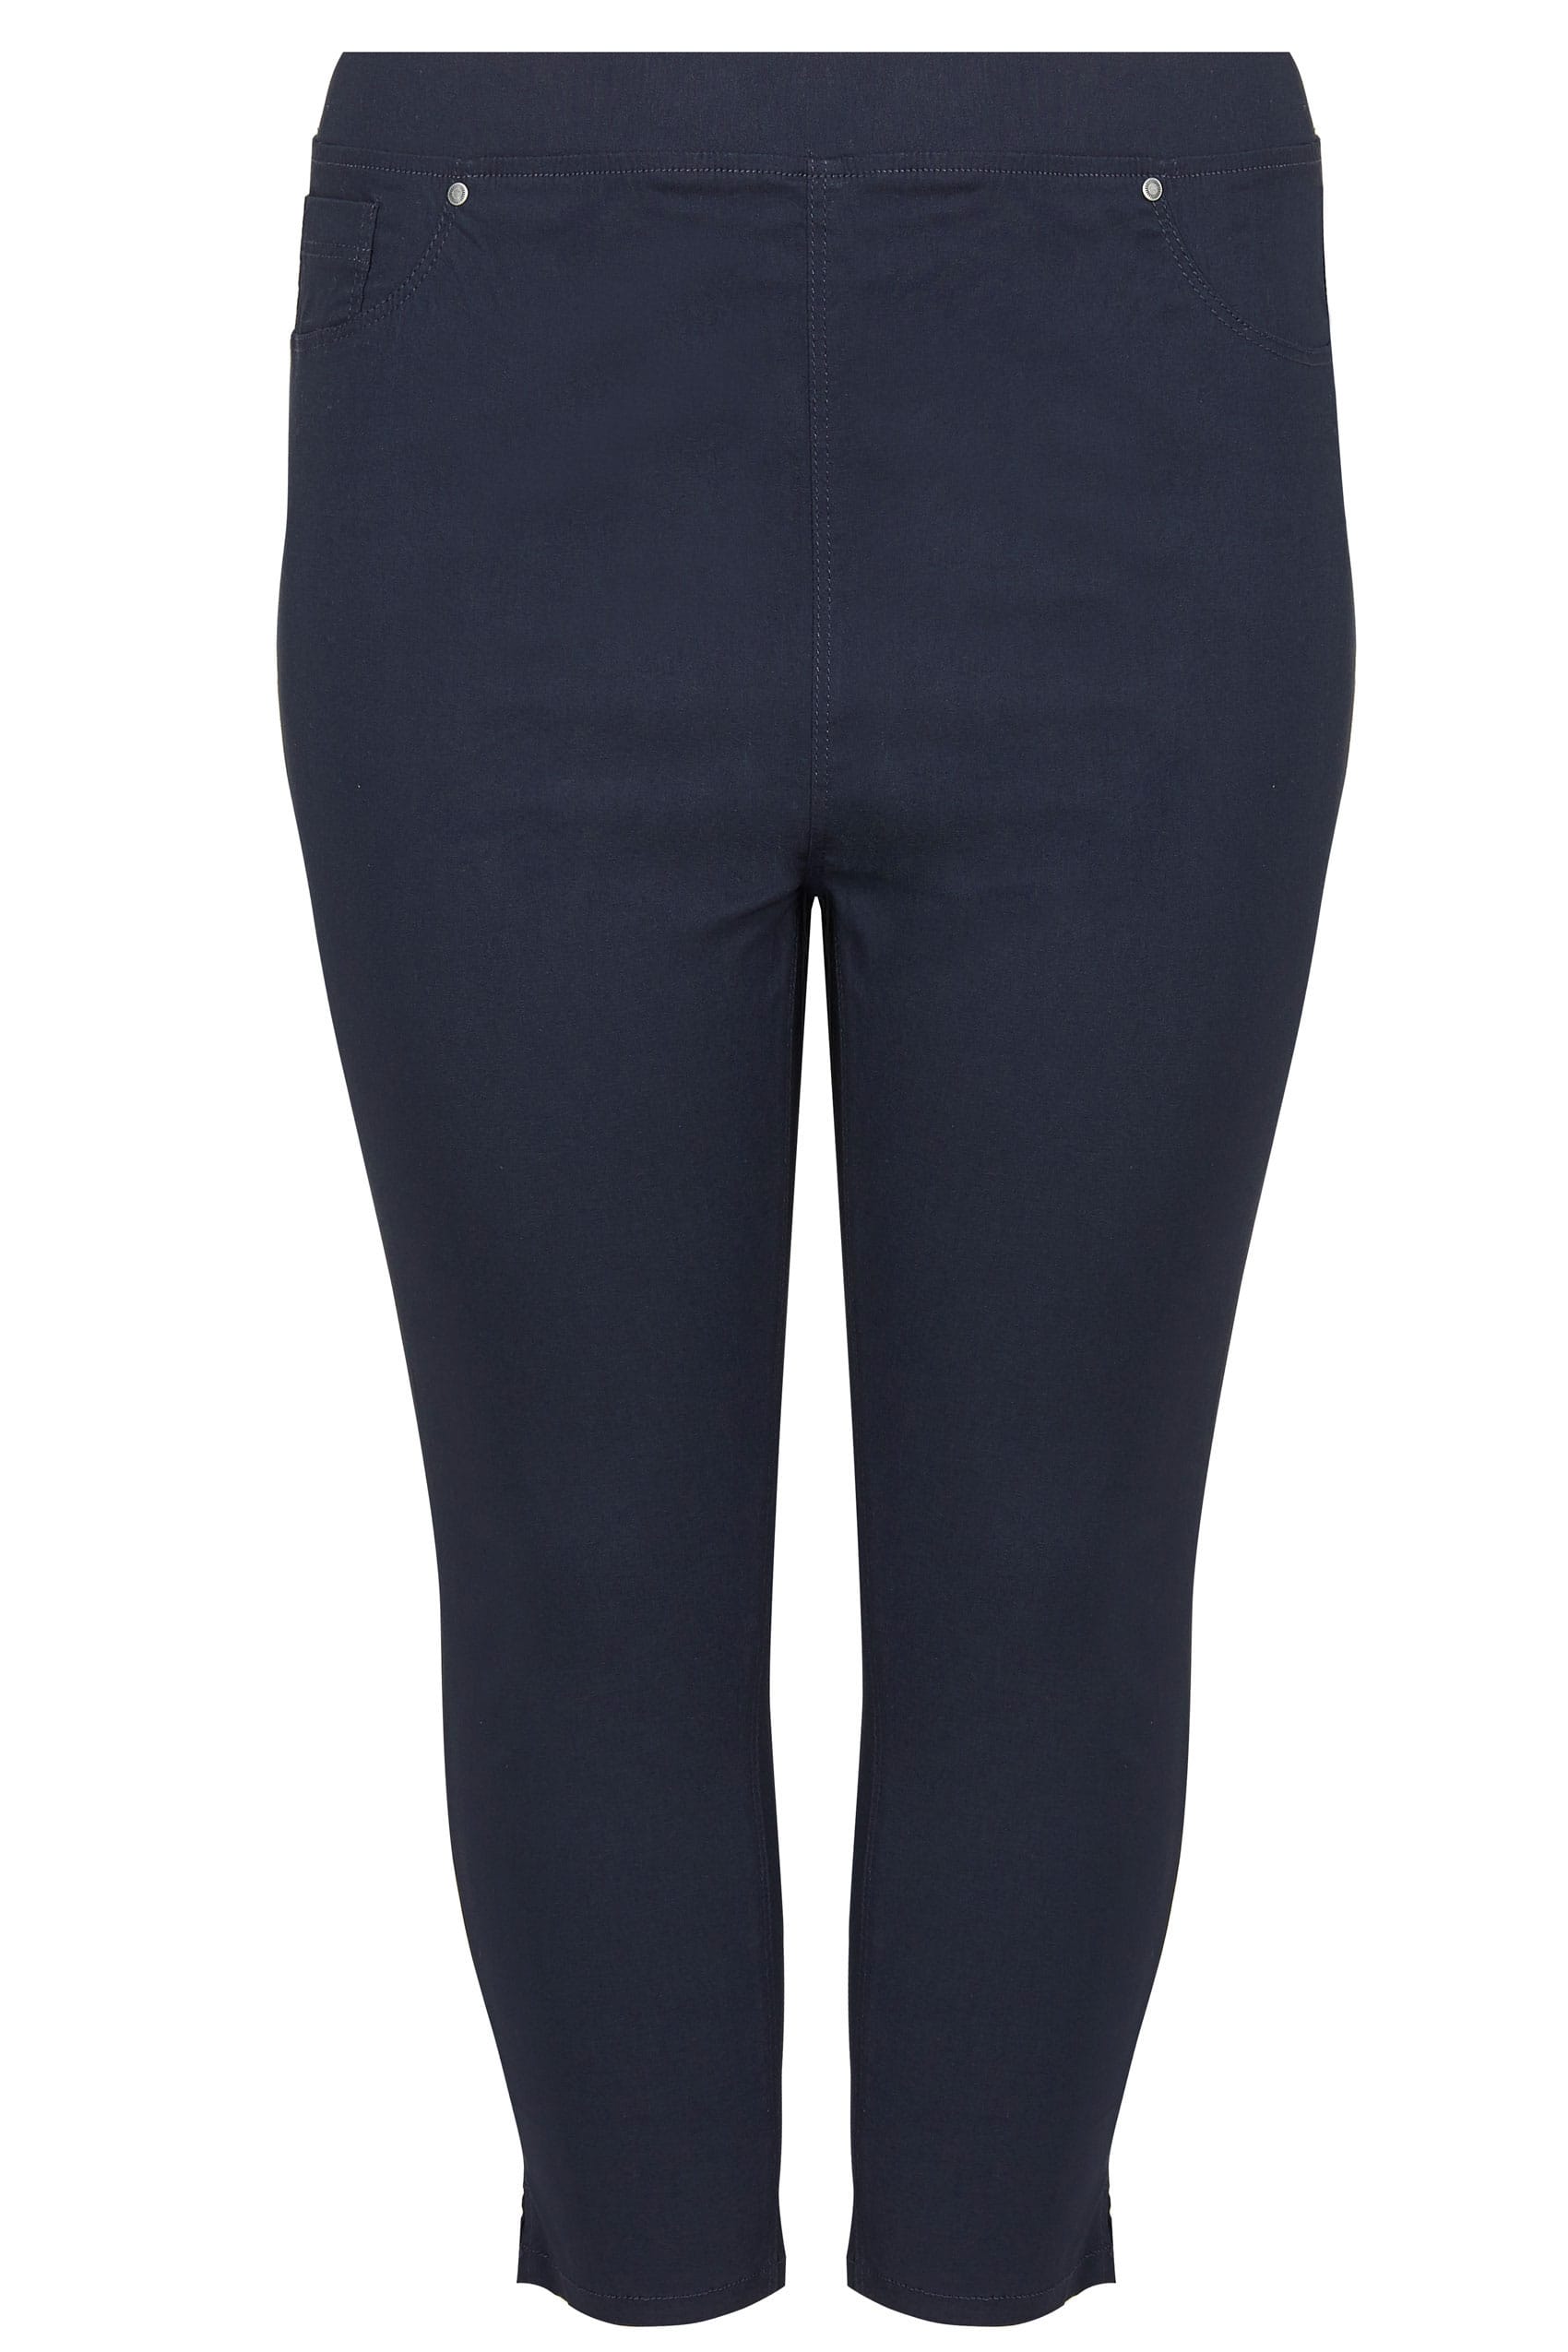 Navy Bengaline Cropped Pull On Trousers, plus size 16 to 36